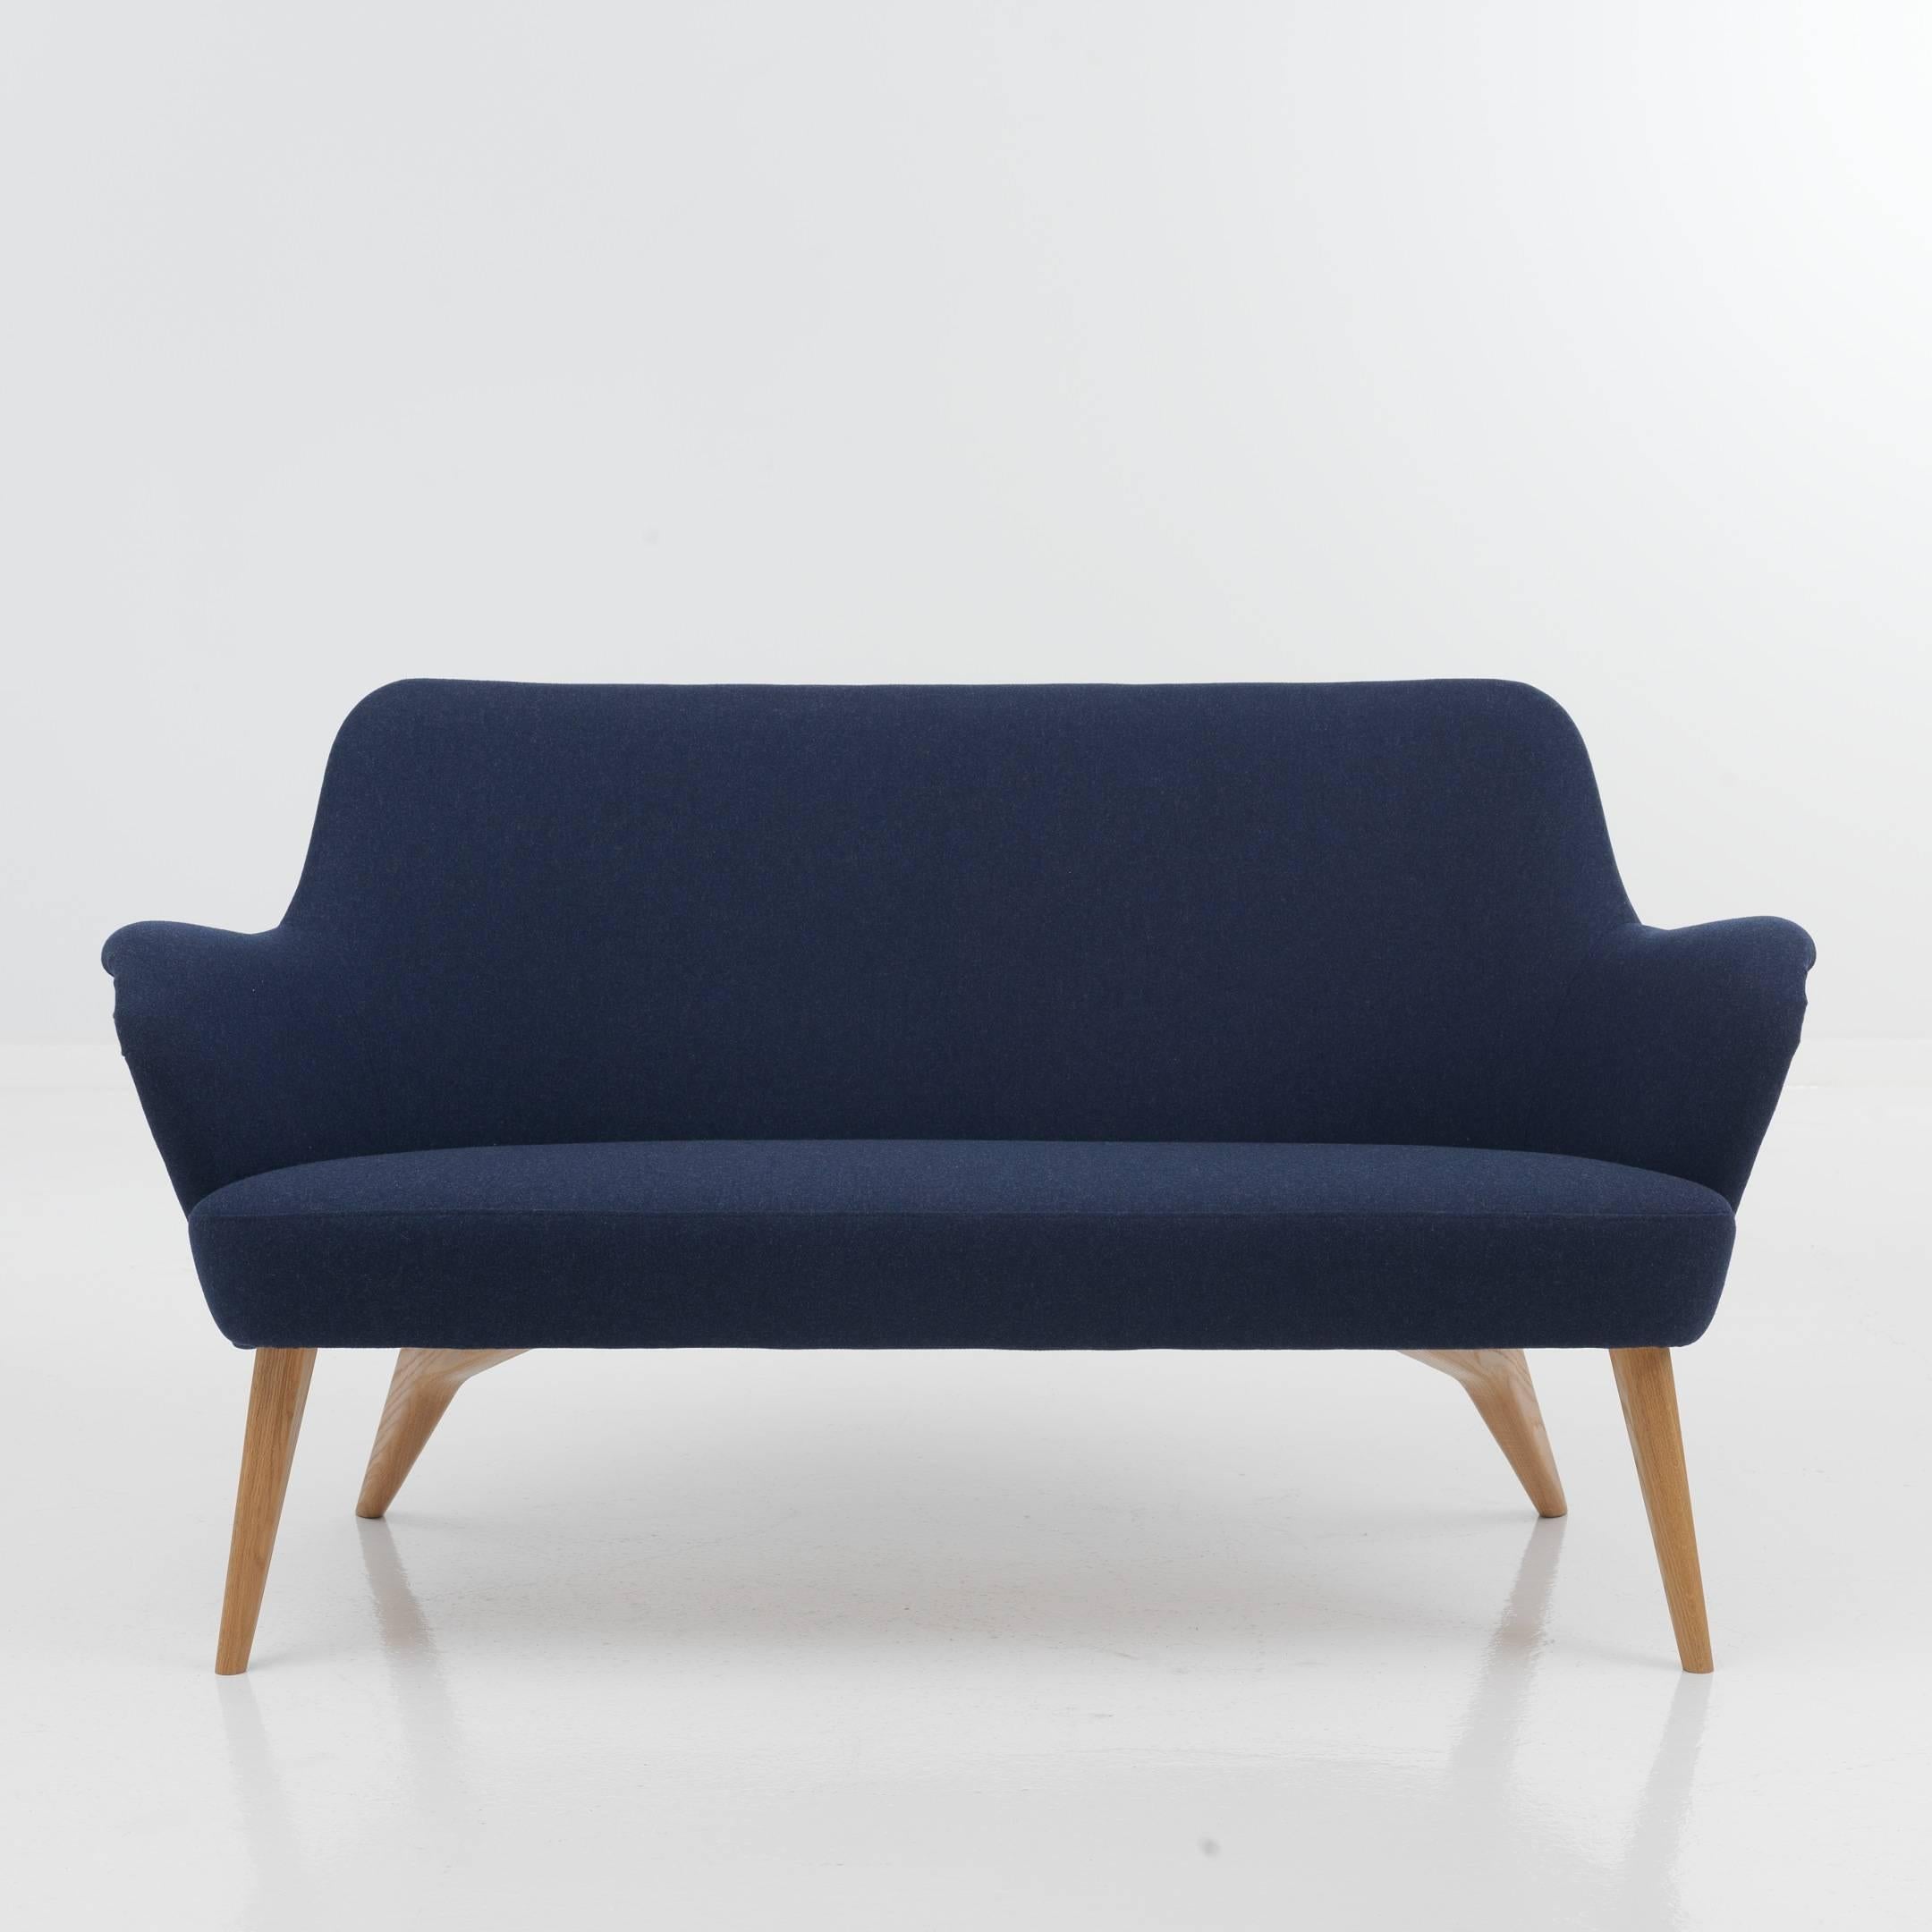 Pedro sofa is designed by Carl-Gustaf Hiort af Ornäs in 1952. Pedro is a compact two-seat sofa of elegant curving forms. Its carefully crafted appearance continues on the rear side. One of the cornerstones of Hiort af Ornäs’s designs was that